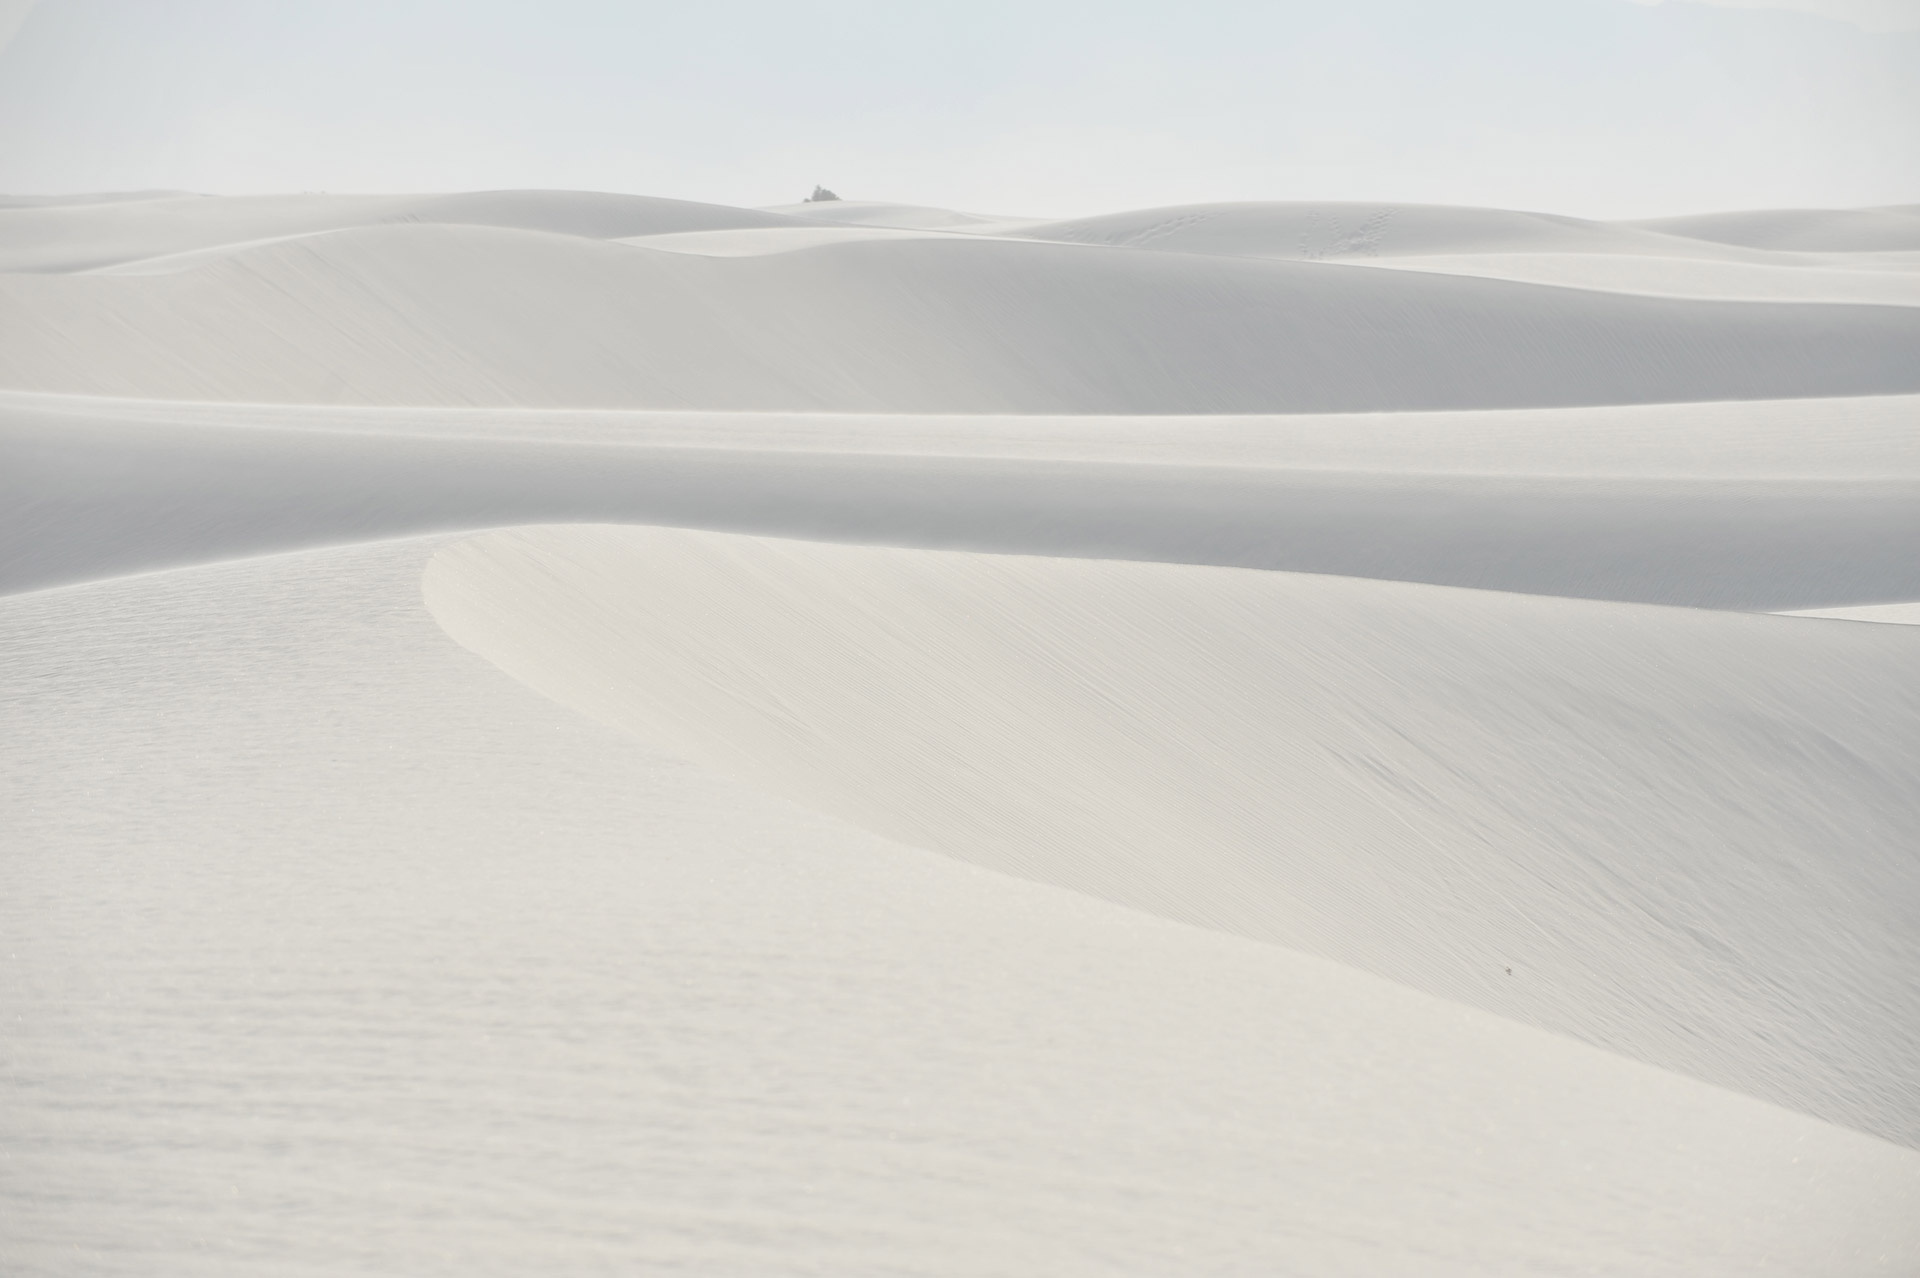 white sands national free photo